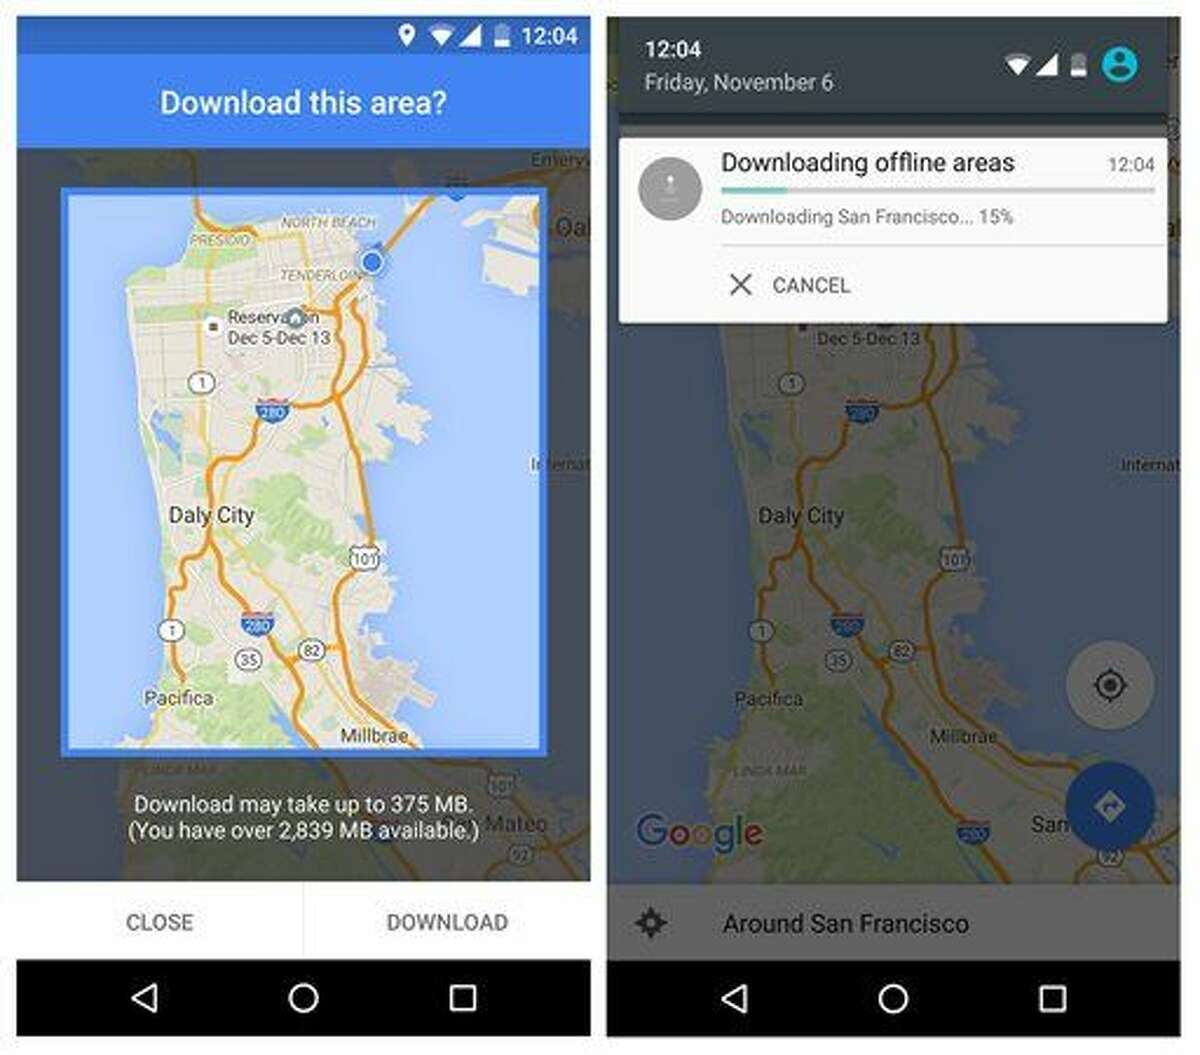 This smartphone screen grab provided by Google shows a map of the San Francisco Bay Area during a demonstration of Google Maps' new offline navigation option. With an update for Android phones Tuesday, Nov. 10, 2015, users will be able to search nearby businesses and get driving directions, including turn-by-turn voice prompts, even if the Internet connection is spotty or non-existent. Google said a version for iPhones will come soon. (Google via AP)